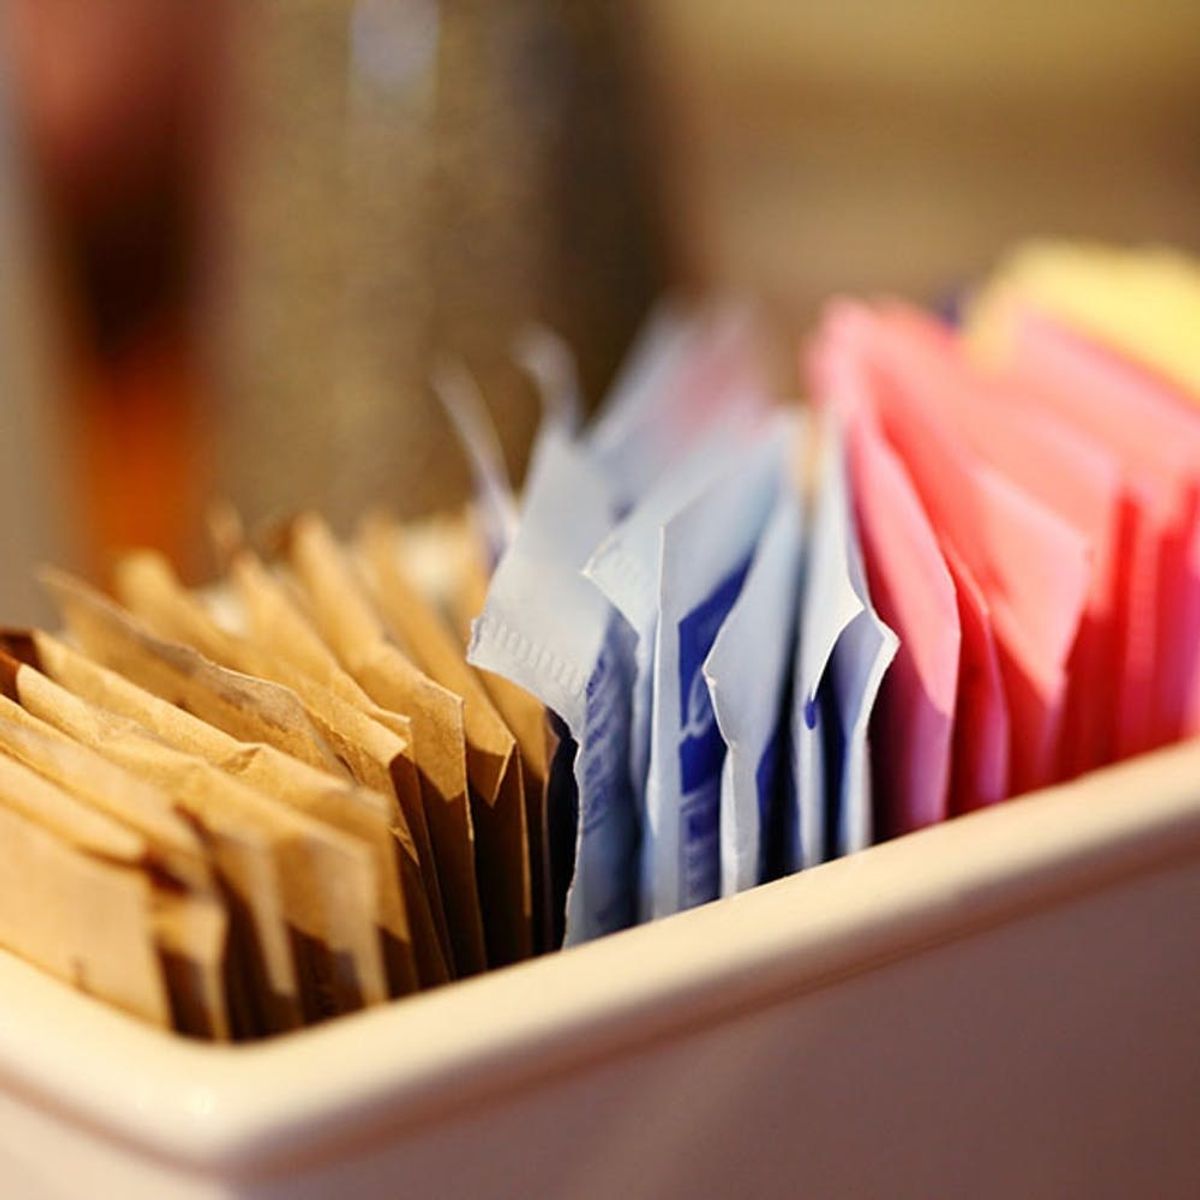 What You Need to Know About the Most Popular Artificial Sweeteners